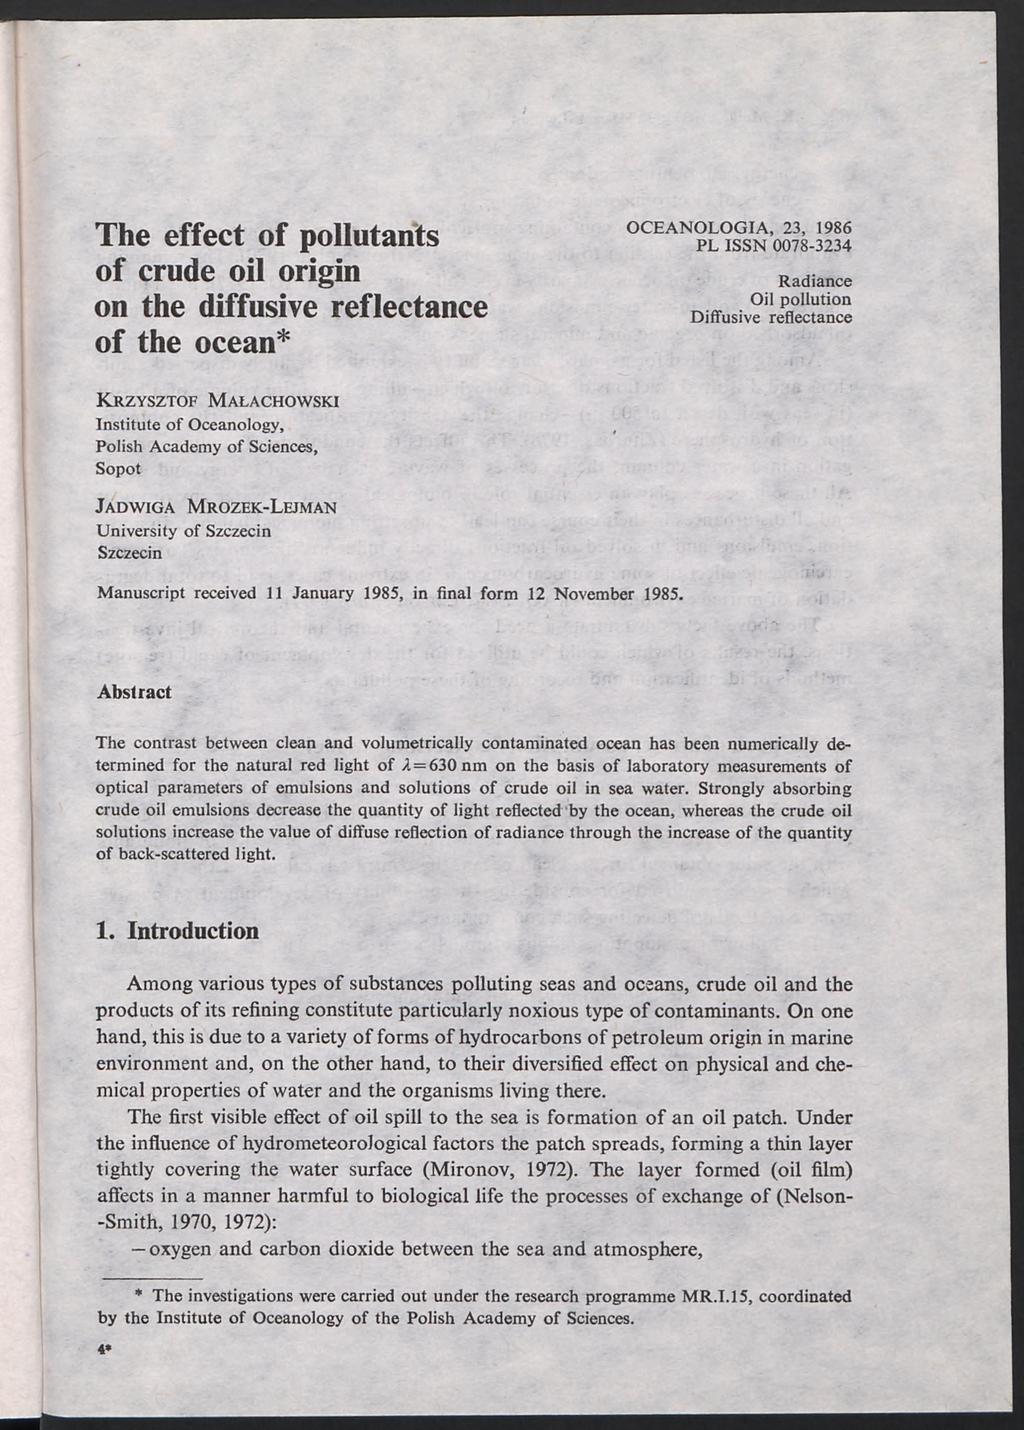 The effect of pollutants of crude oil origin on the diffusive reflectance of the ocean* O C E A N O L O G IA, 23, 1986 PL ISSN 0078-3234 R adiance Oil pollution Diffusive reflectance K r z y s z t o